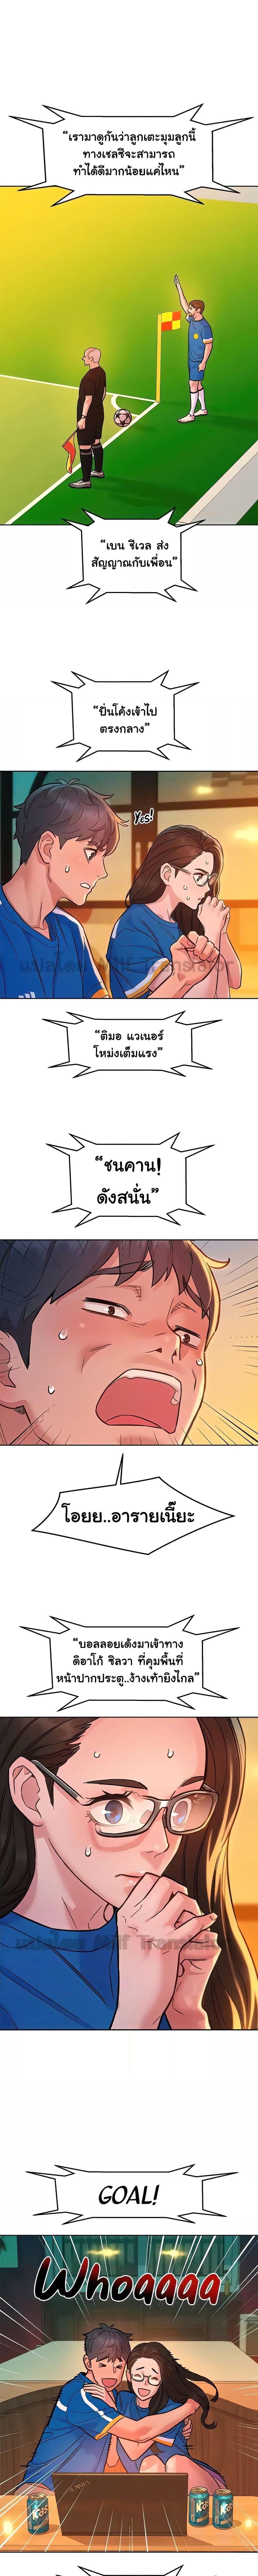 Let’s Hang Out from Today ตอนที่ 54 ภาพ 12